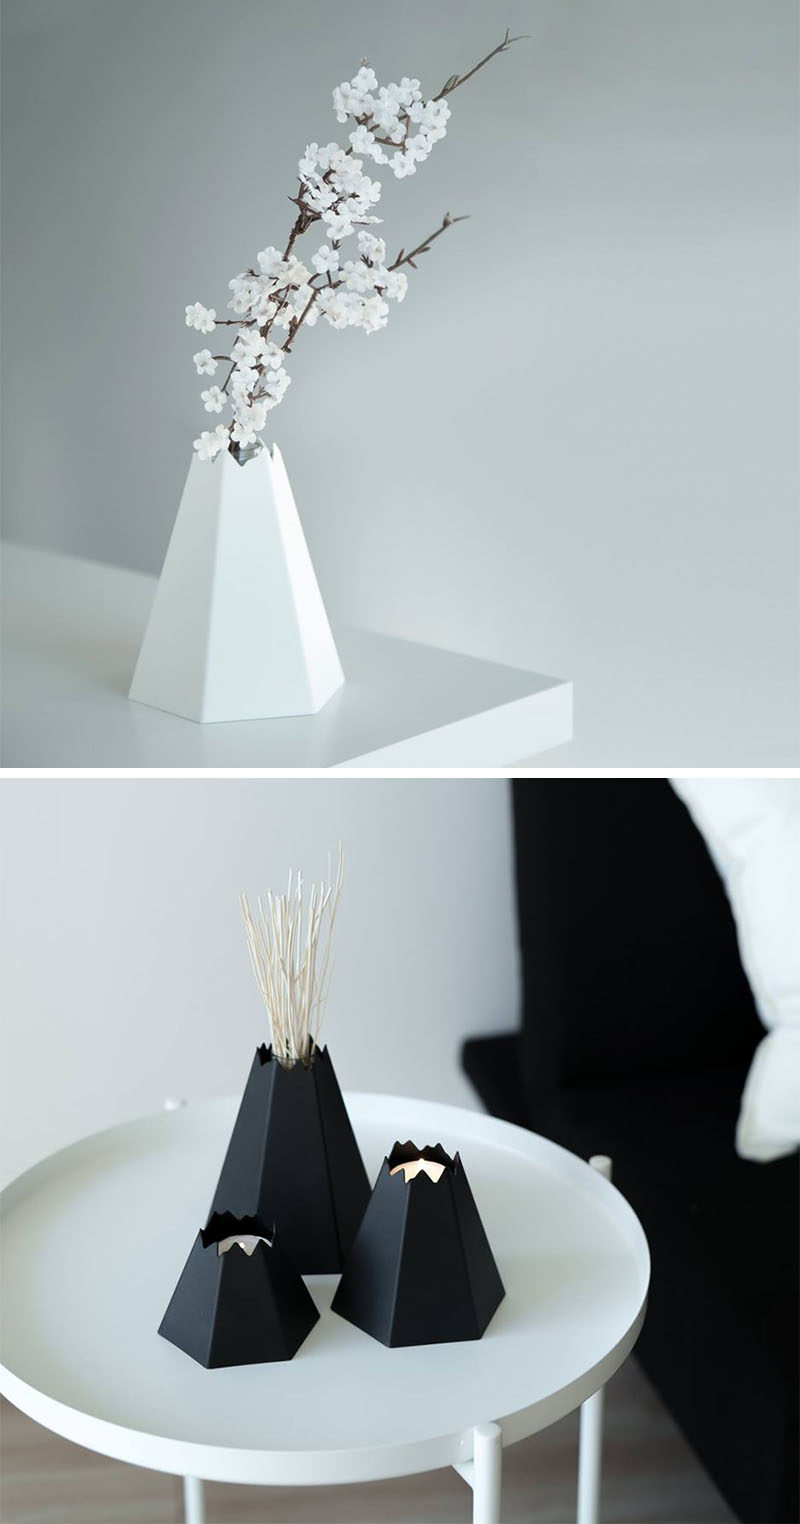 These modern home decor items named Volcano, can be used in two ways - in one way as a candle holder and in another as a simple piece of decor to place on your coffee table, shelves, or nightstand.